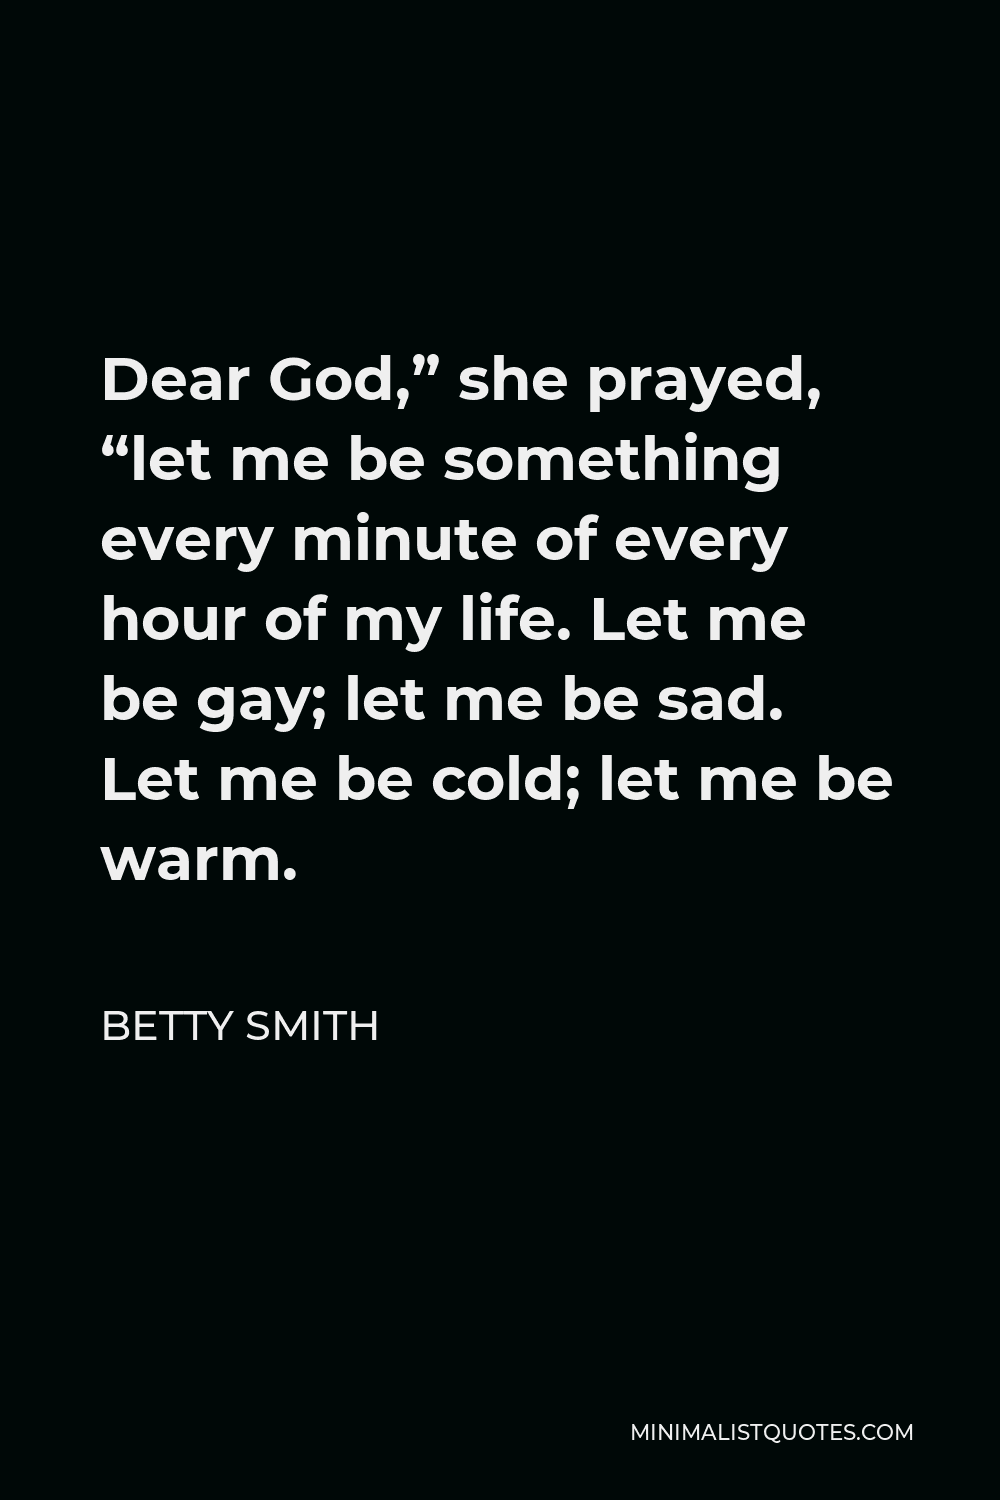 Betty Smith Quote - Dear God,” she prayed, “let me be something every minute of every hour of my life. Let me be gay; let me be sad. Let me be cold; let me be warm.